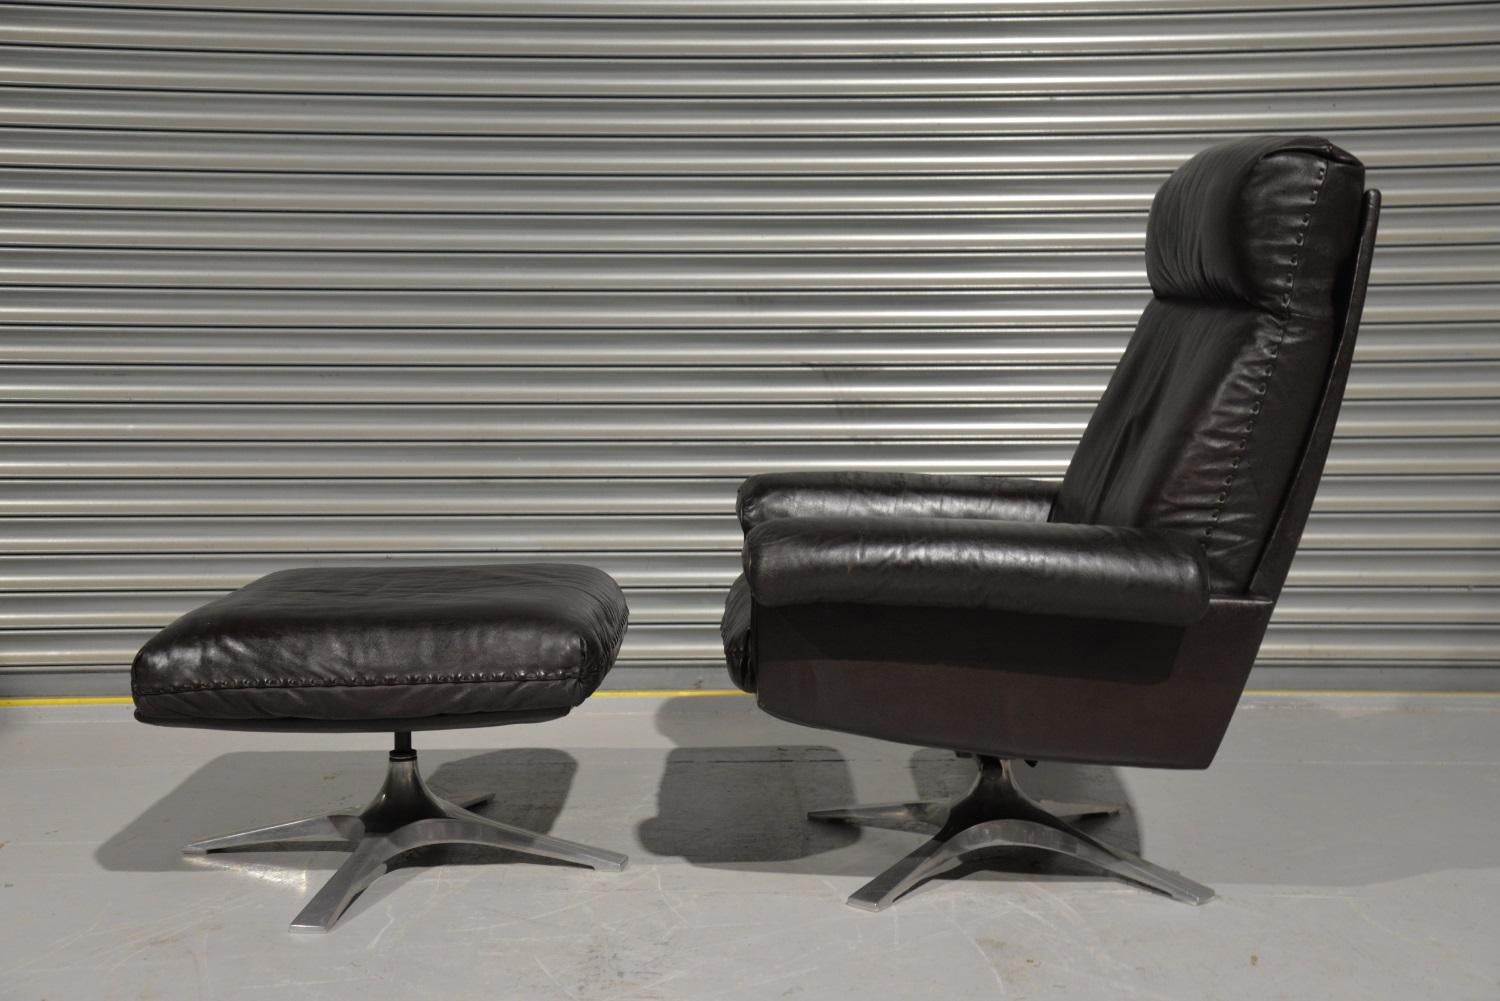 Discounted airfreight for our US and International customers (from 2 weeks door to door)

We are delighted to bring to you a highly desirable and rarely available vintage 1970s De Sede DS 31 high back swivel leather armchair with ottoman. Hand built